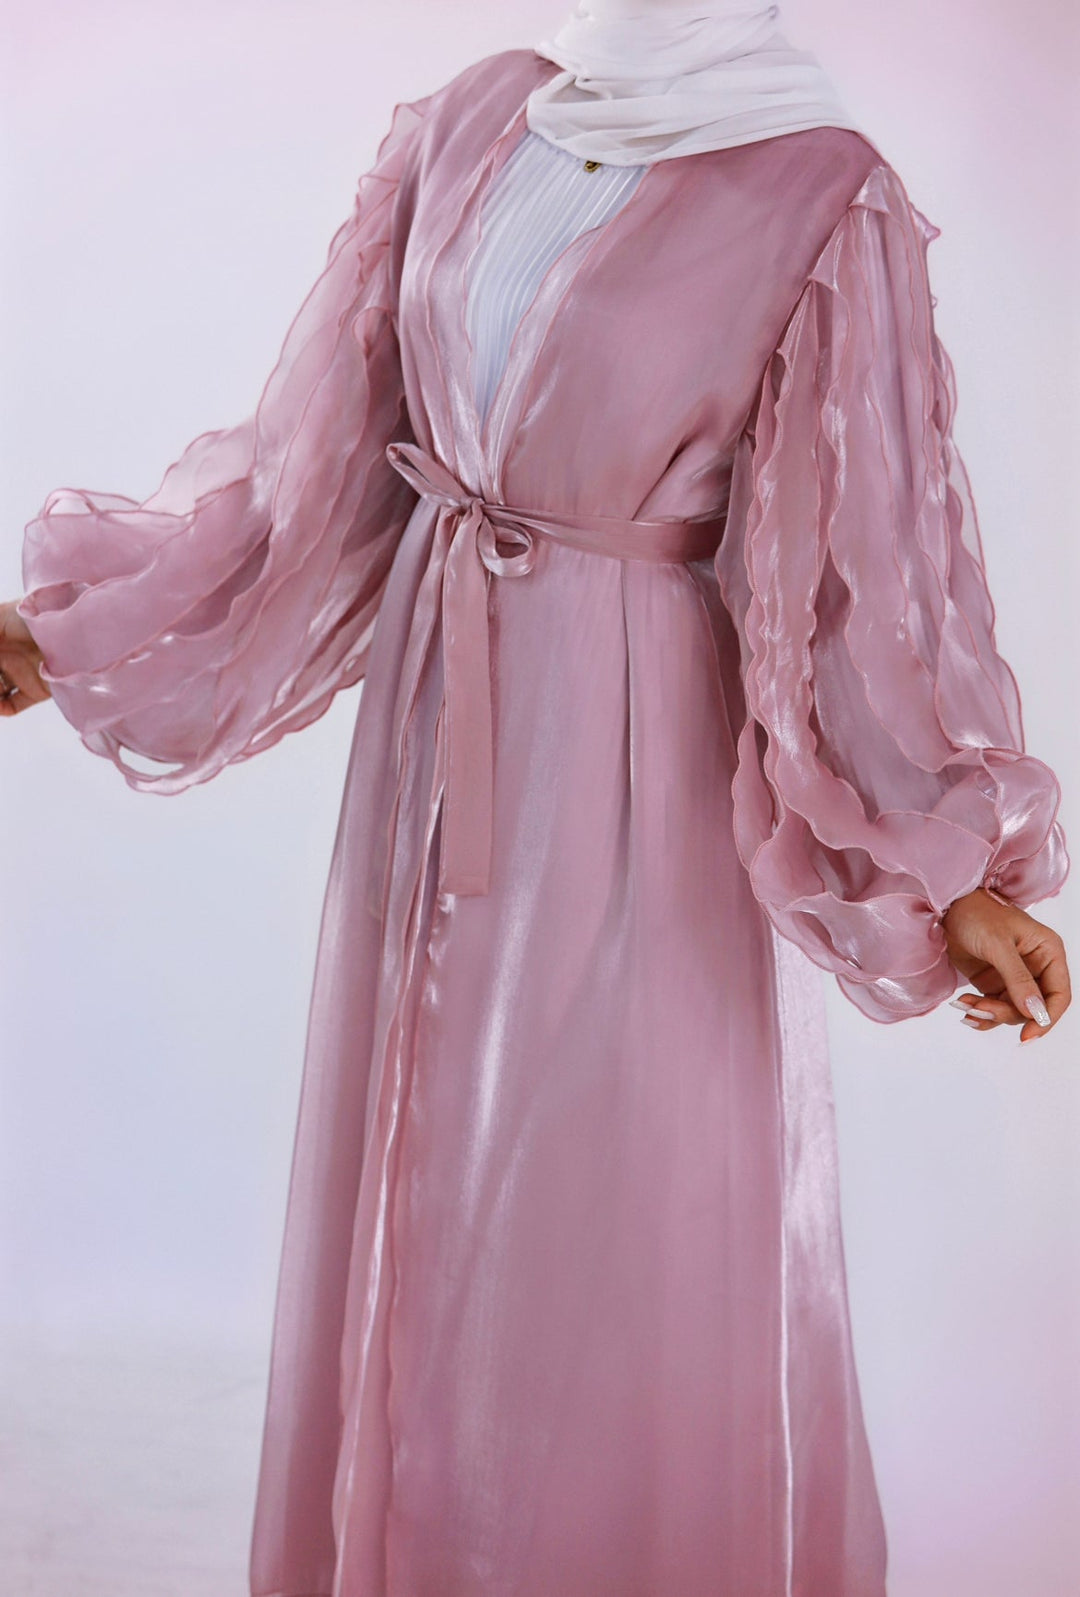 Get trendy with Bella 2-Piece Abaya Set - Pink - Dresses available at Voilee NY. Grab yours for $120 today!